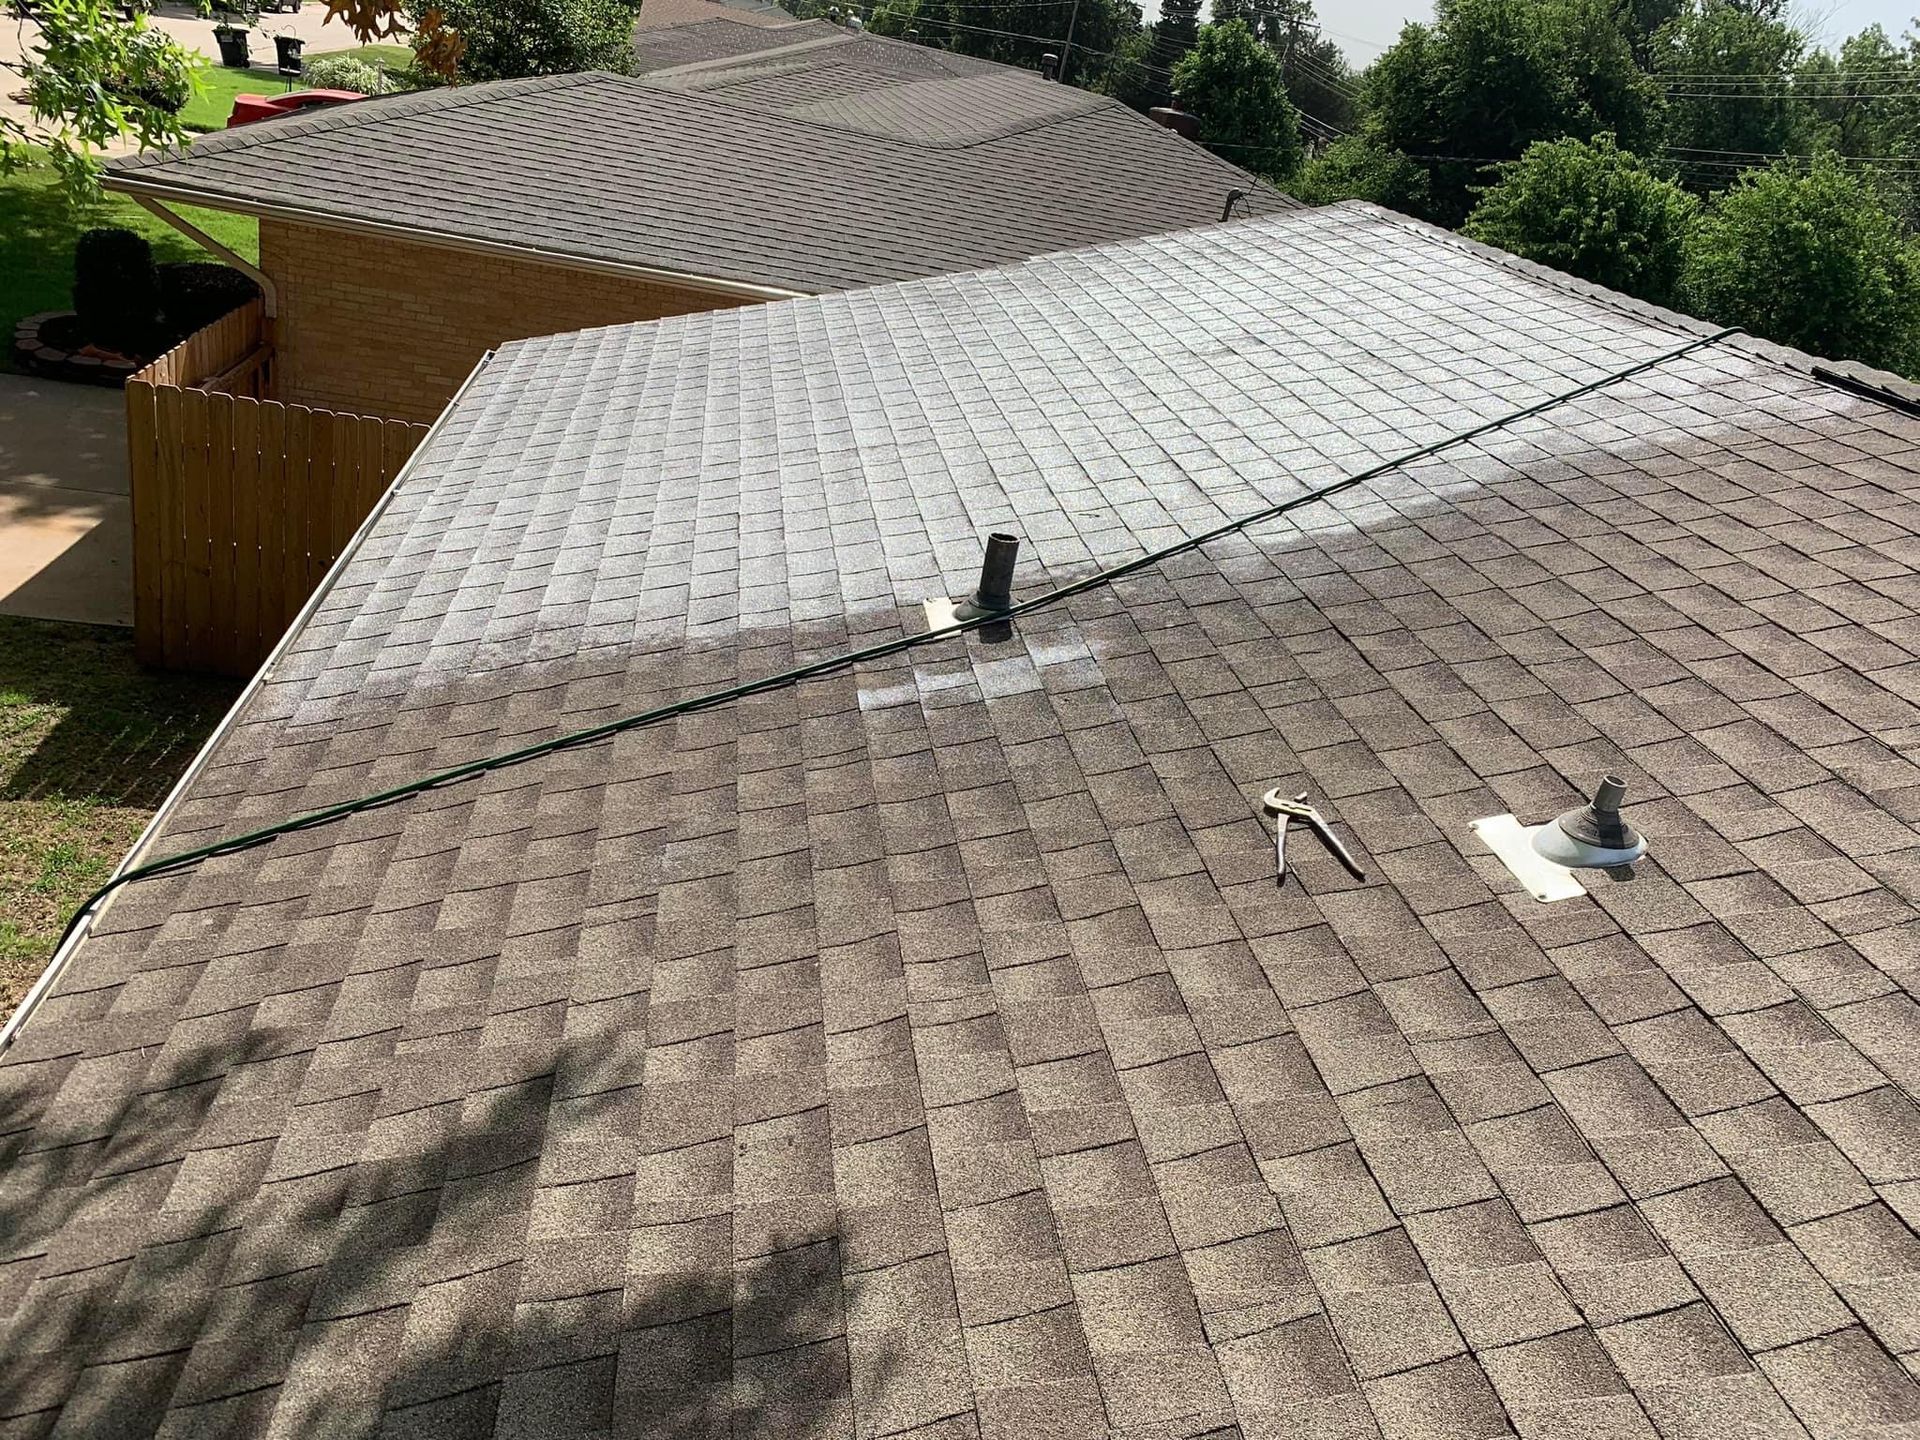 A roof of a house with a lot of shingles on it.